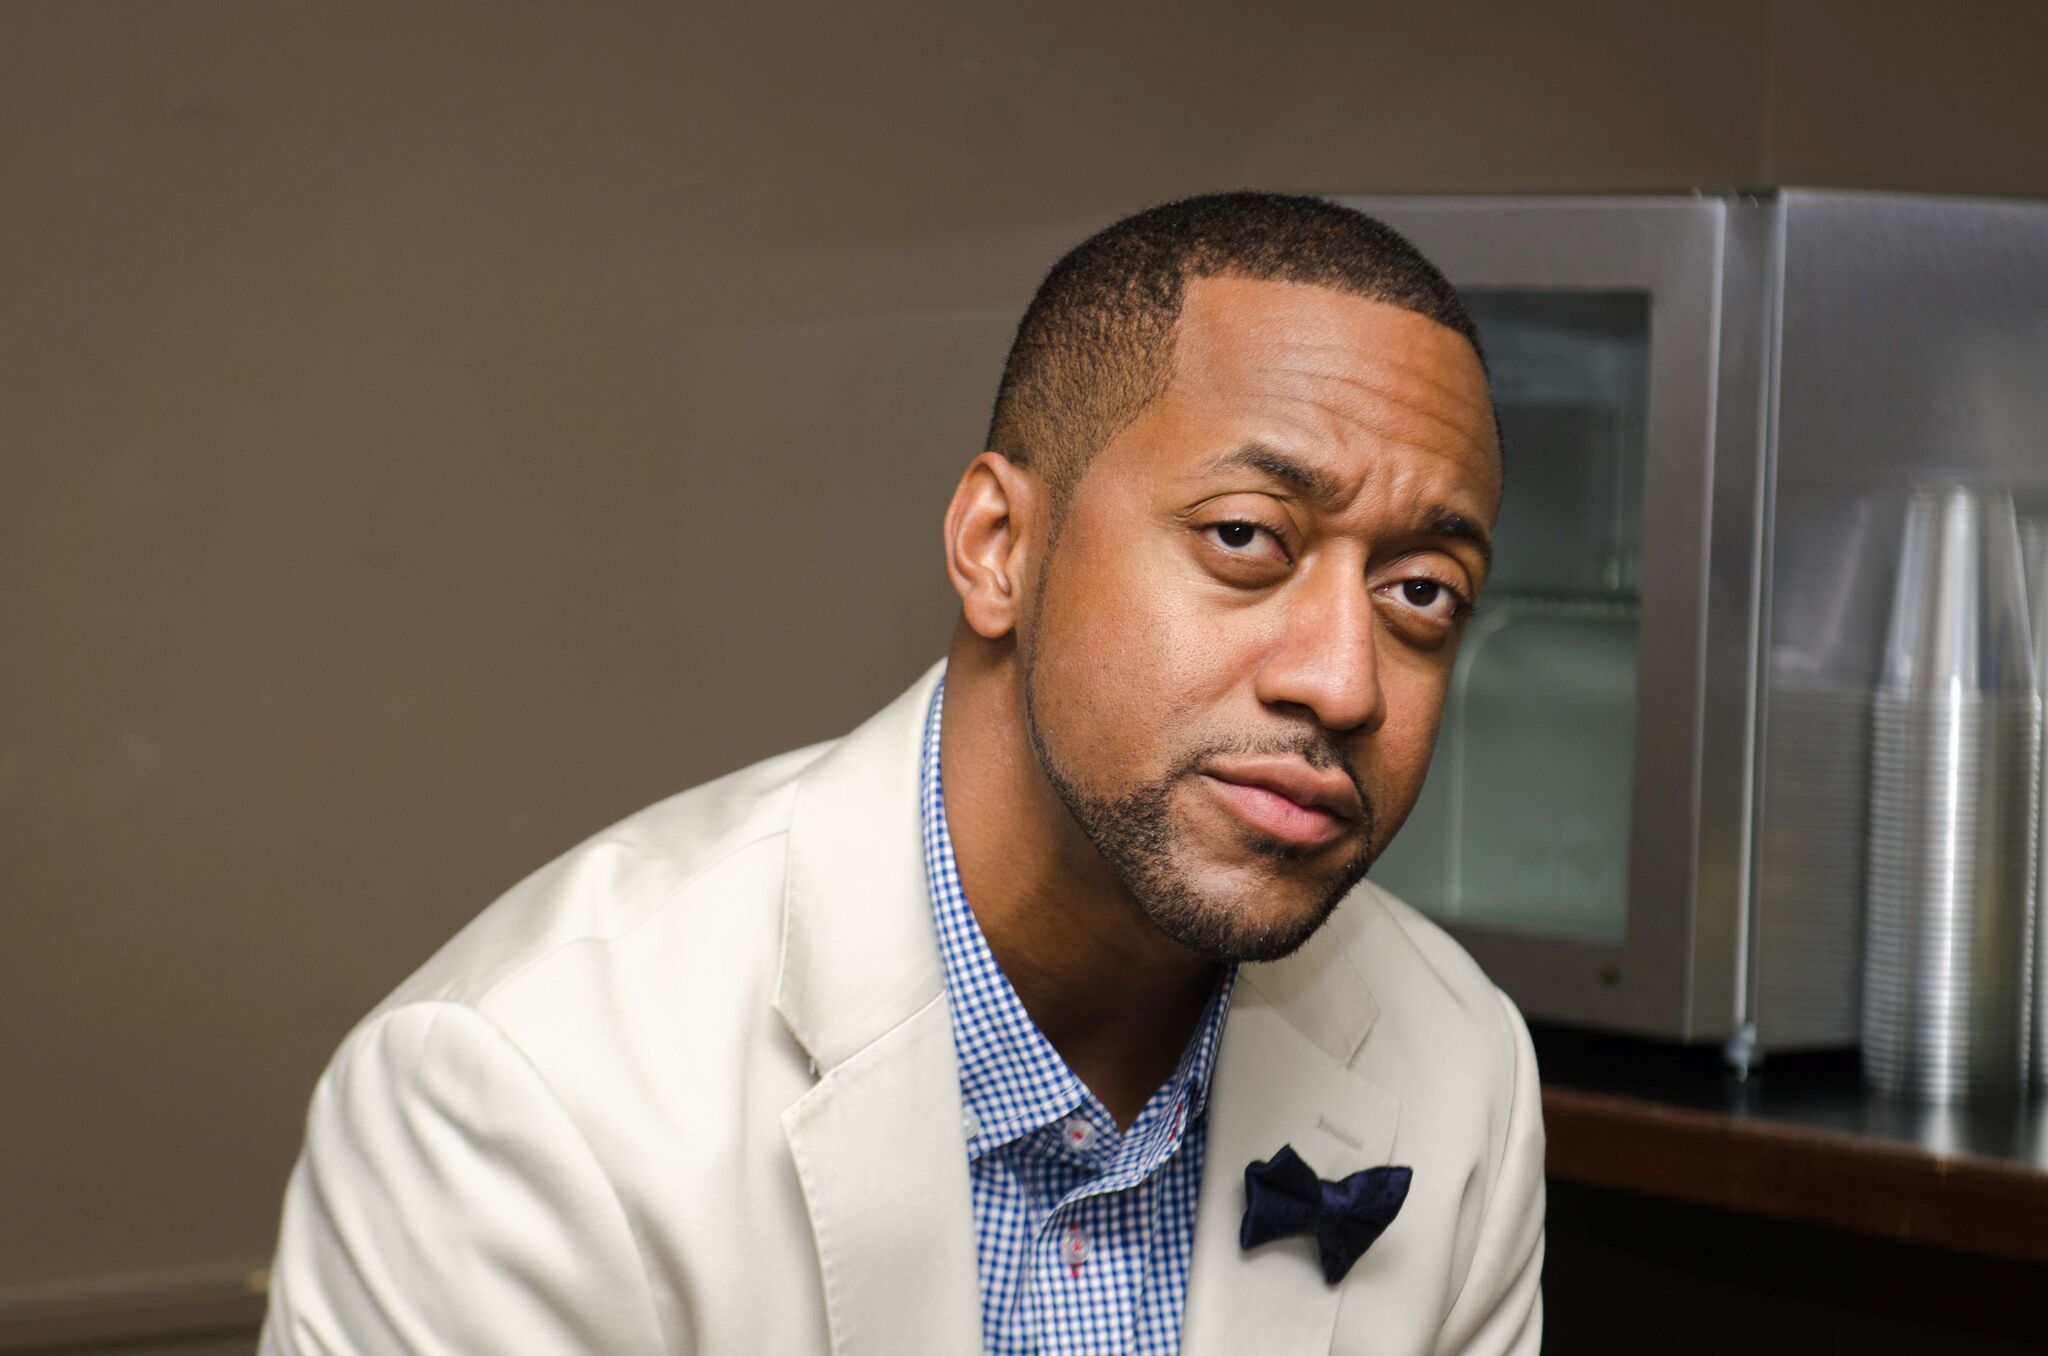 Jaleel White attends the 6th Annual Agency Quiz Bowl at Stage 48 on October 16, 2014 | Photo: Getty Images